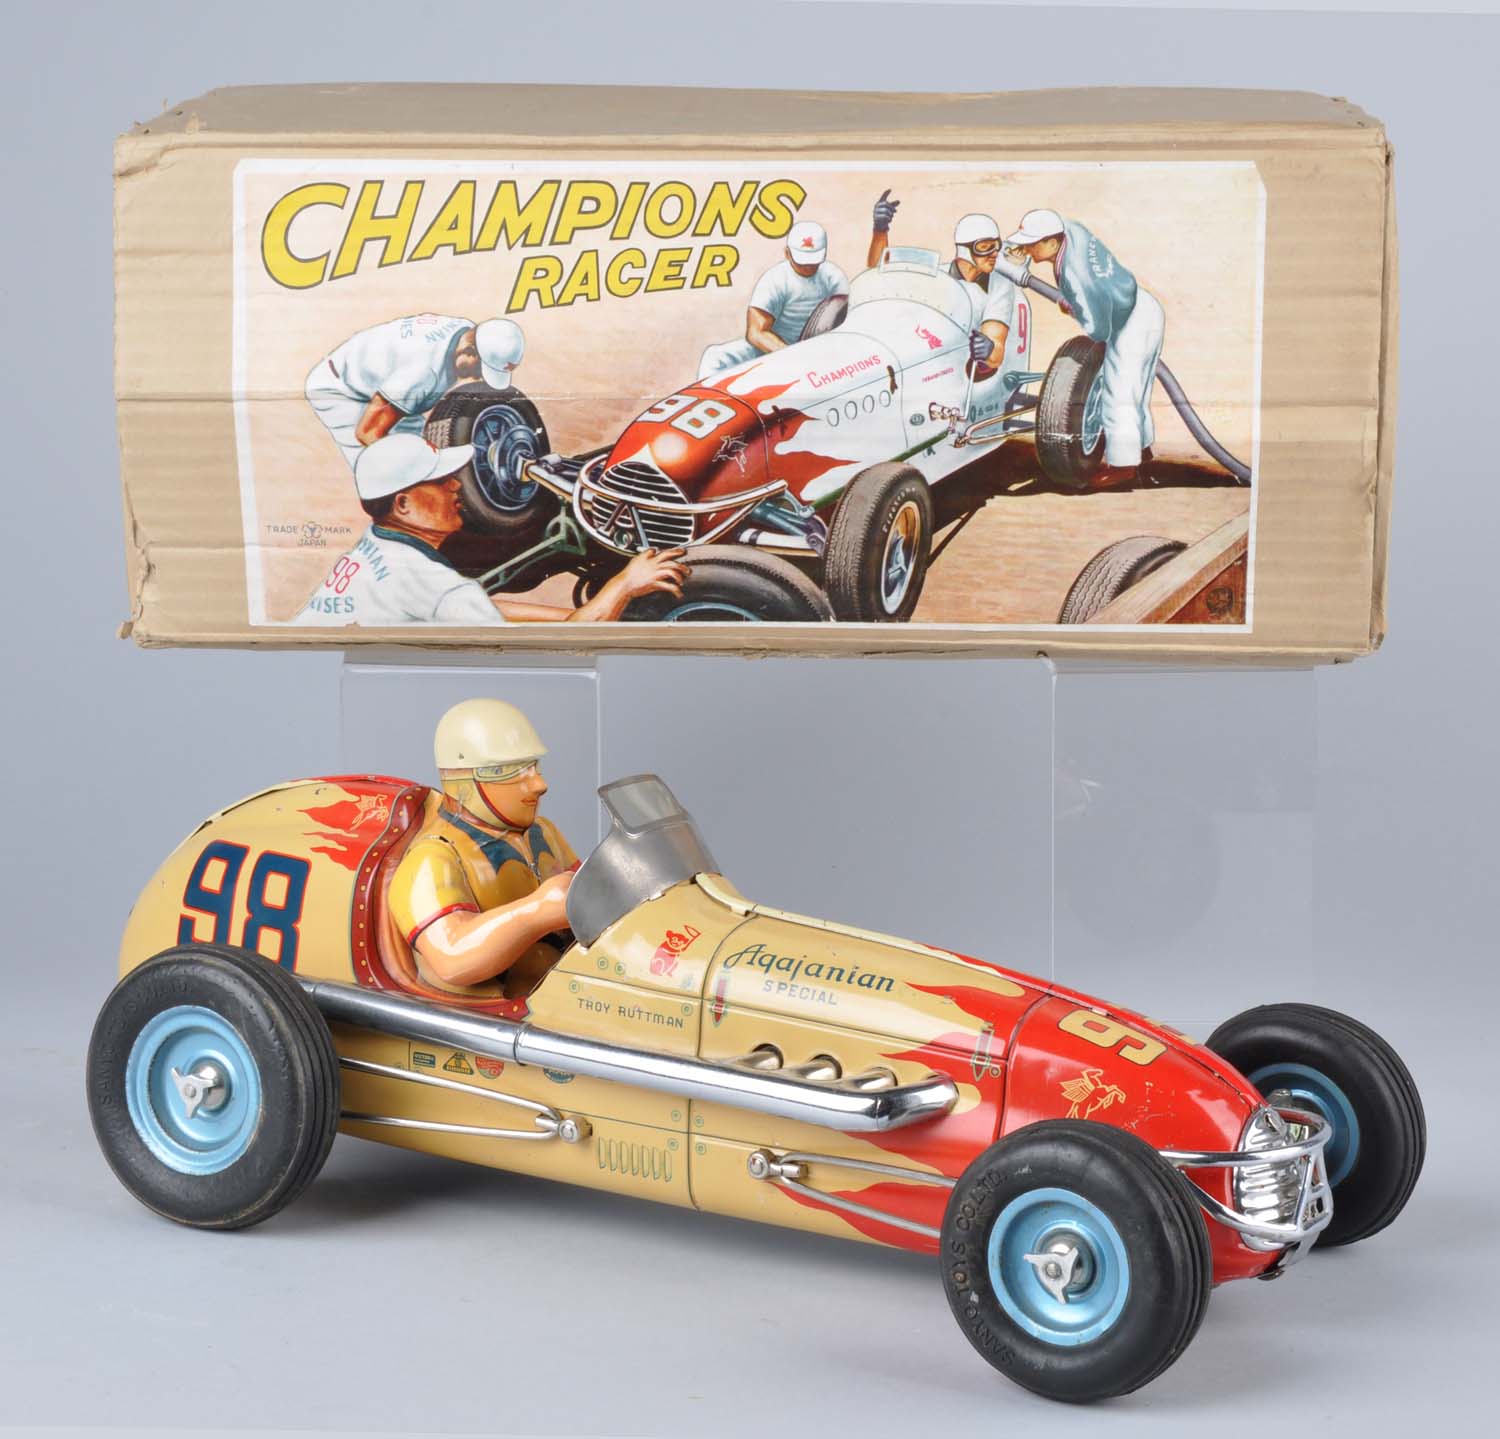 Morphy Auctions to offer robots, European toy cars May 30-31